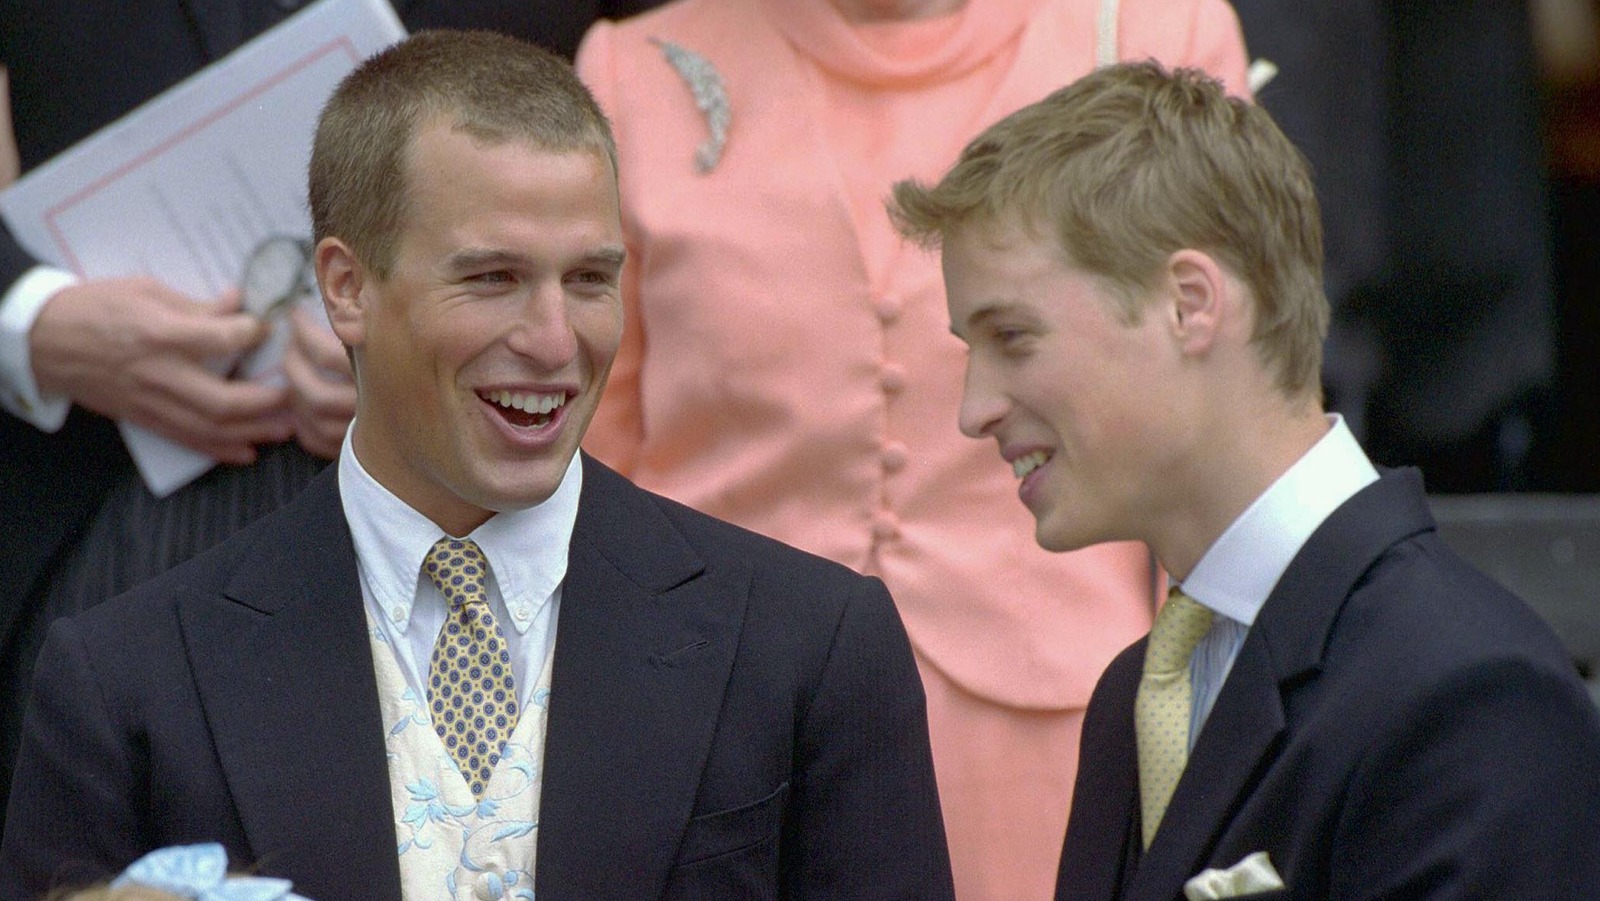 Inside Prince William's Relationship With Peter Phillips